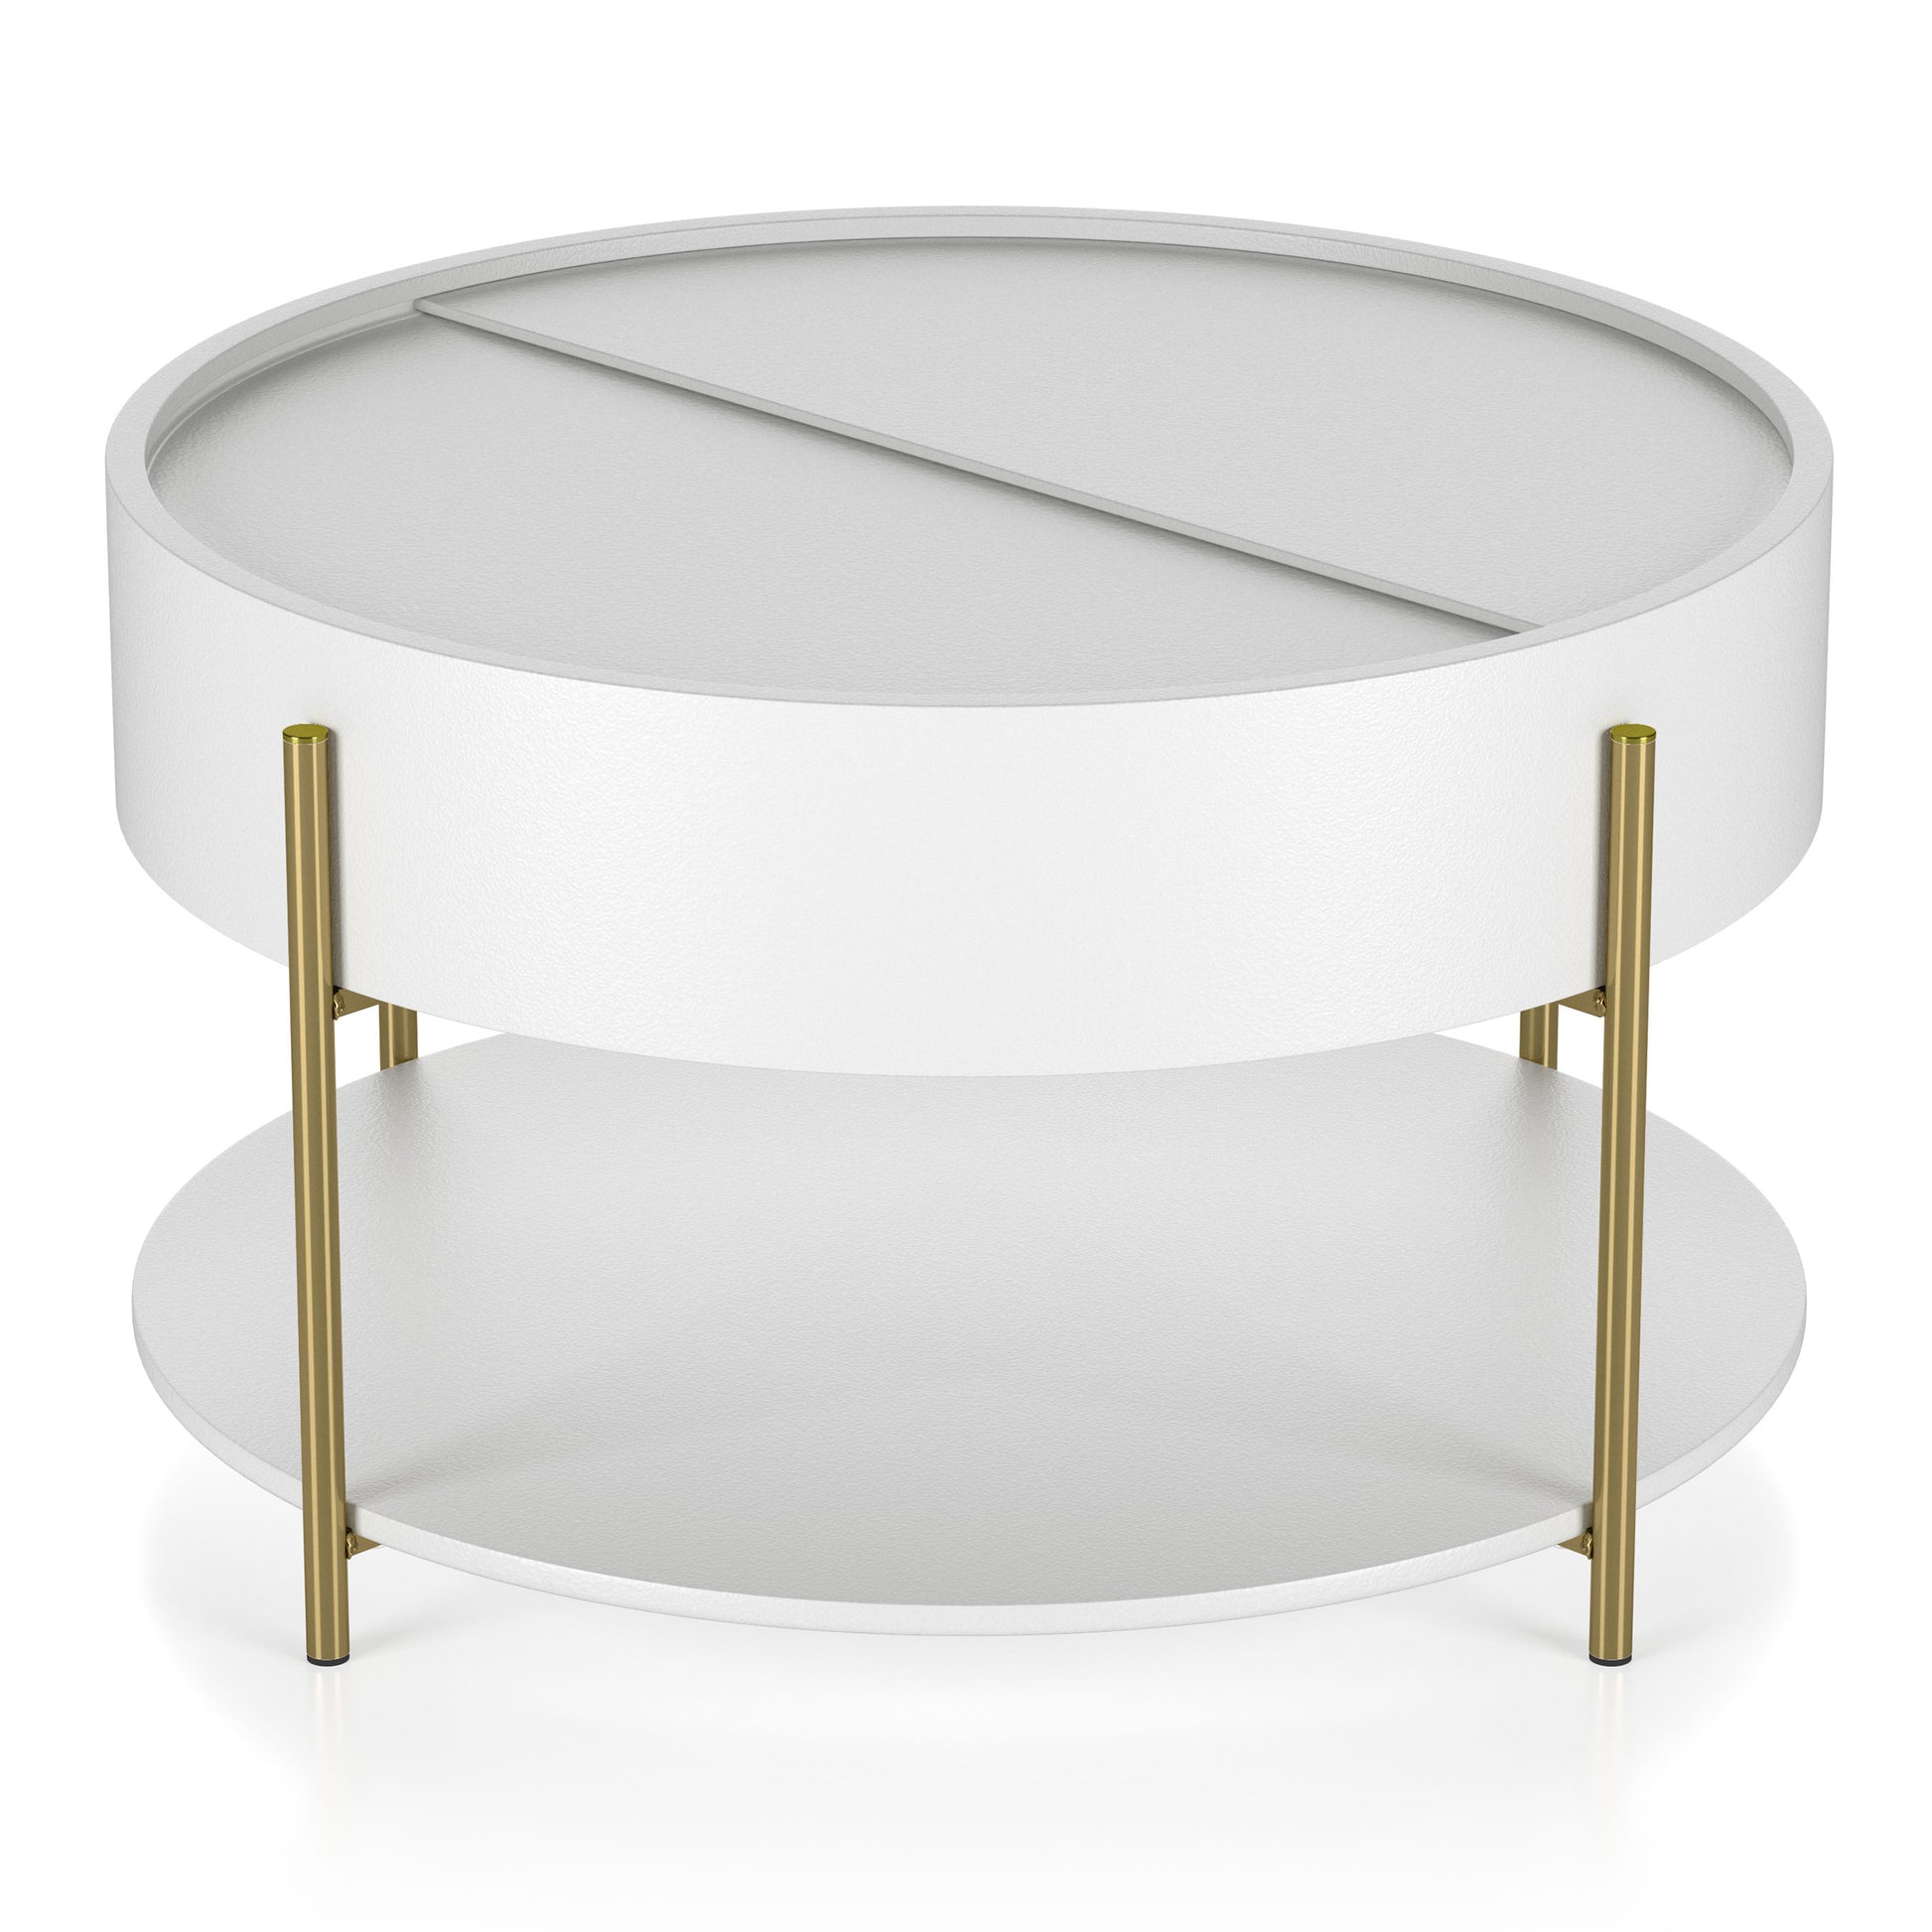 Angled modern white and gold round storage coffee table on a white background